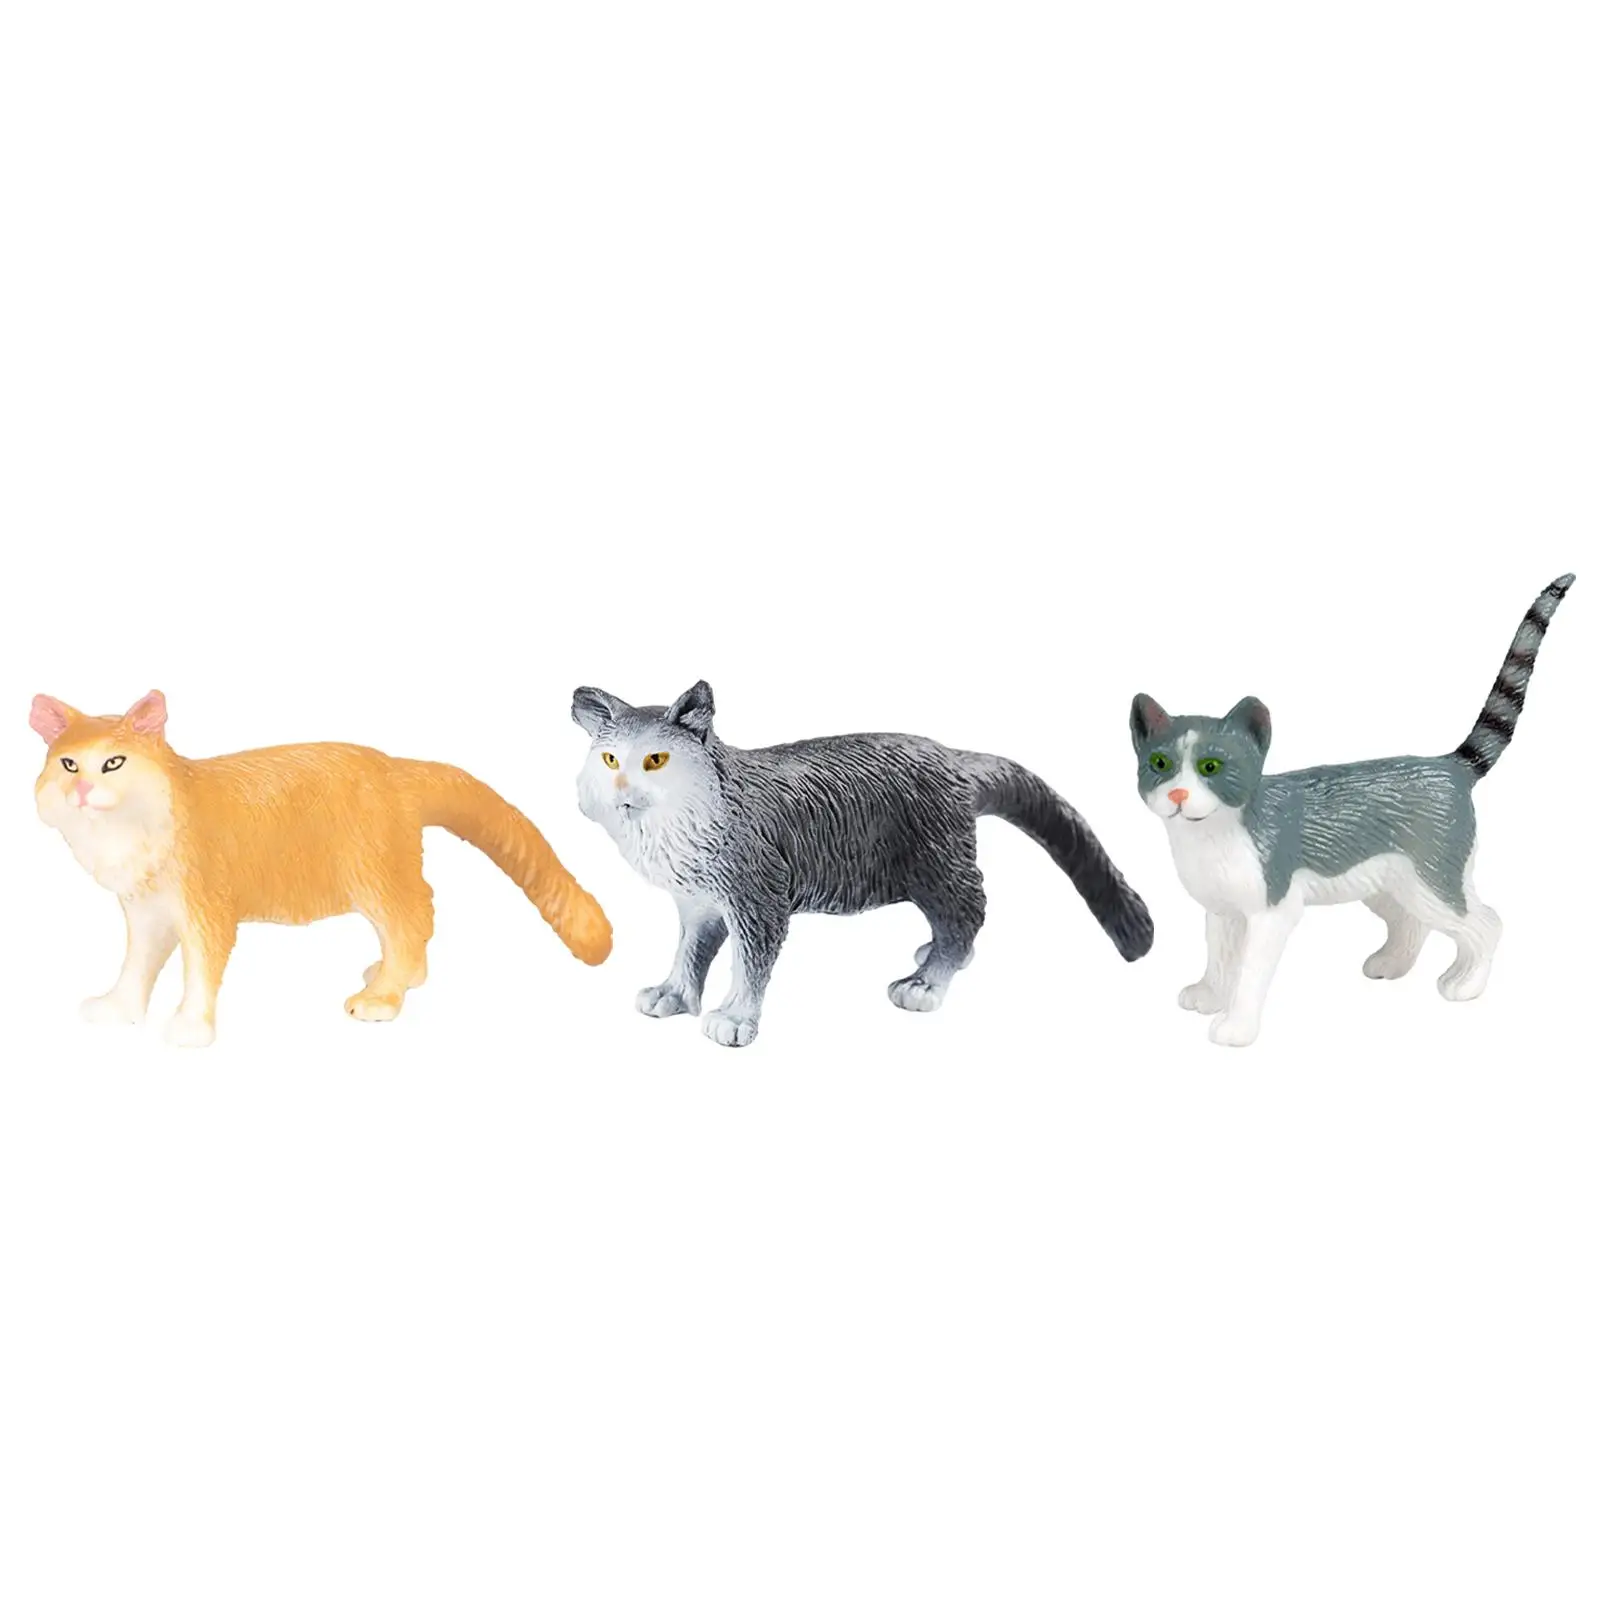 Realistic Animals Figures for Kids Children Simulation Cat Ornaments Collections for Cake Topper Party Favor Birthday Gift Decor